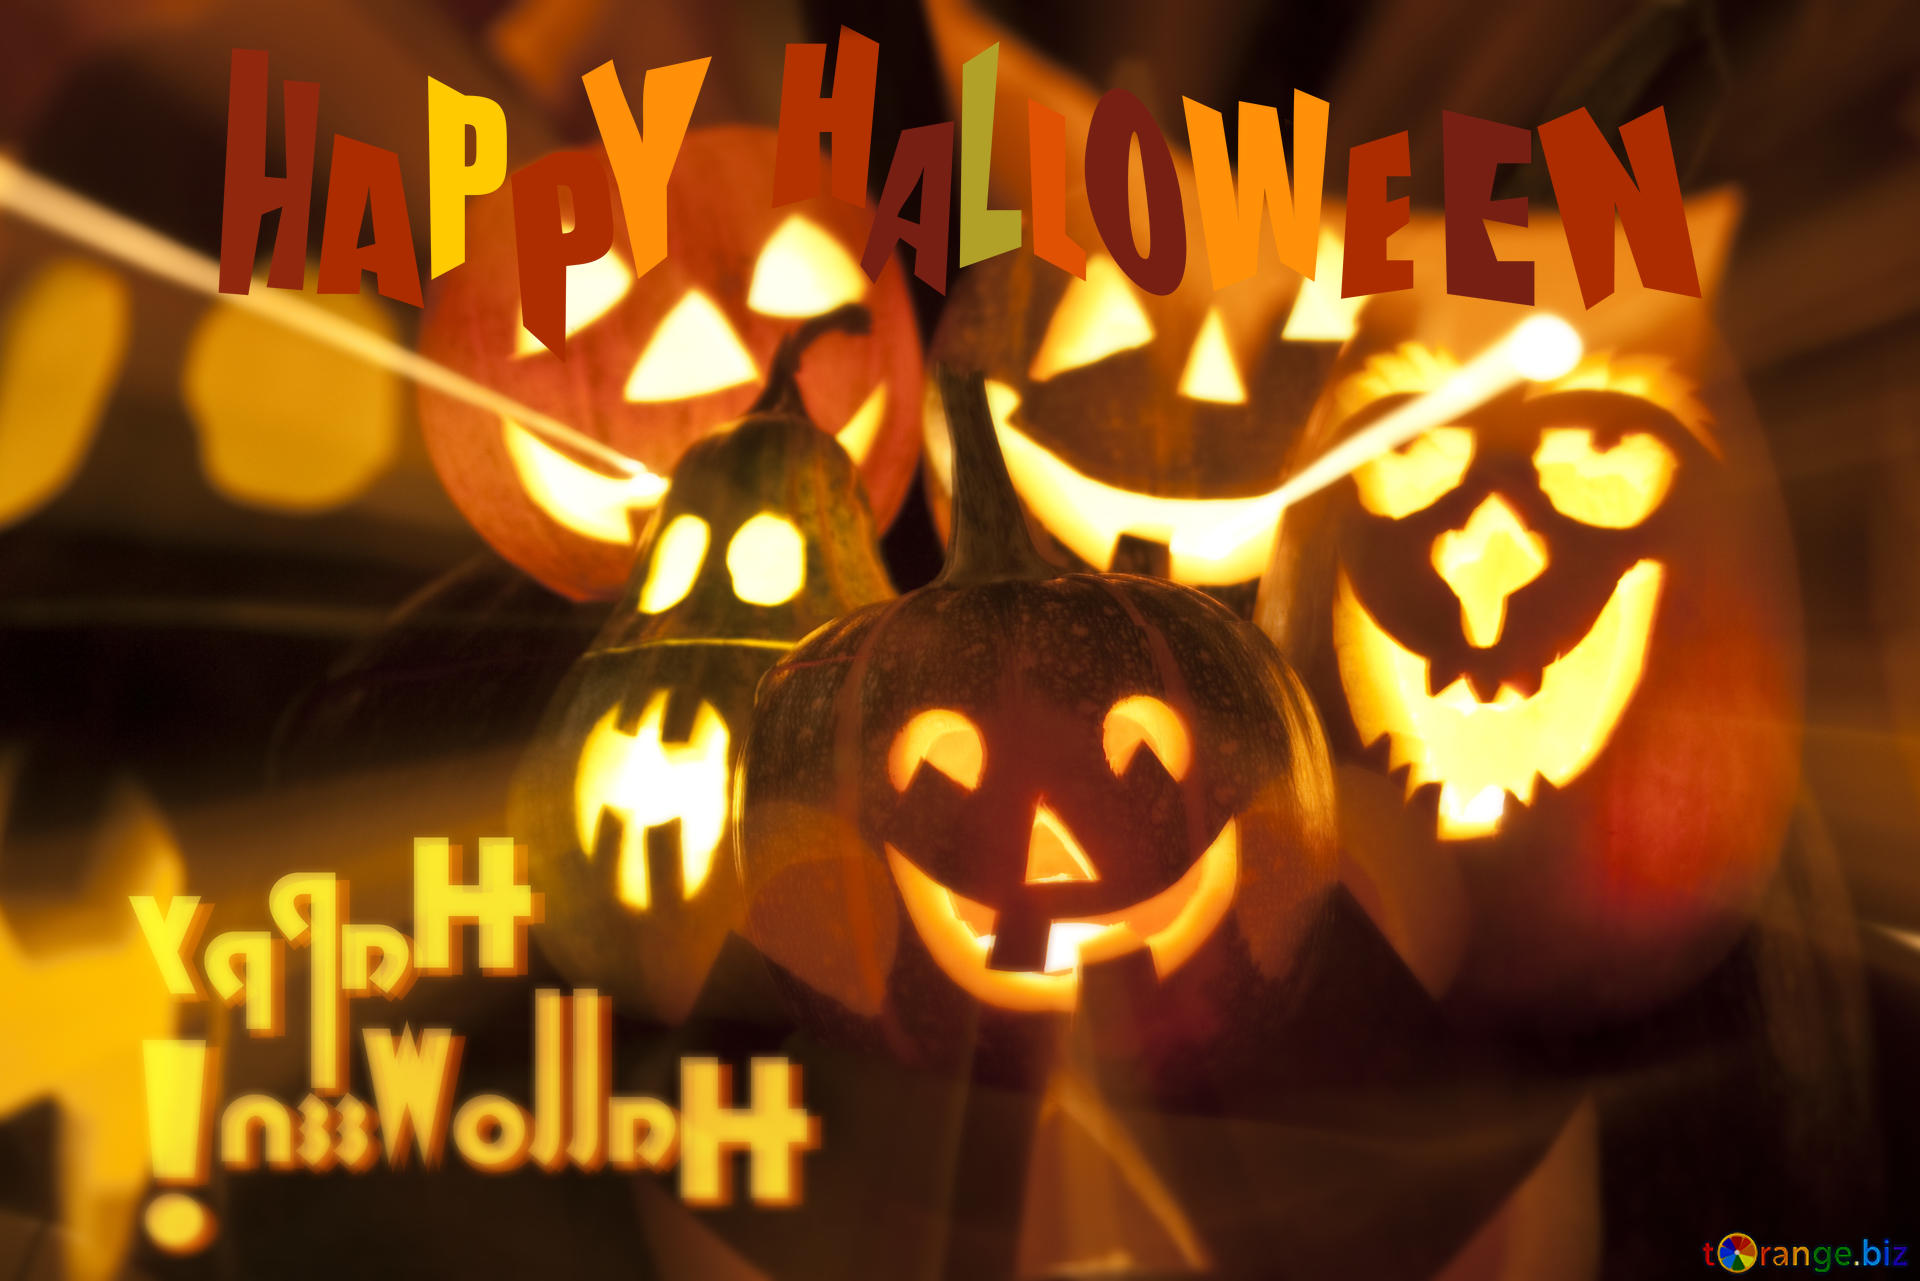 Picture Wallpaper Halloween On Cc By License